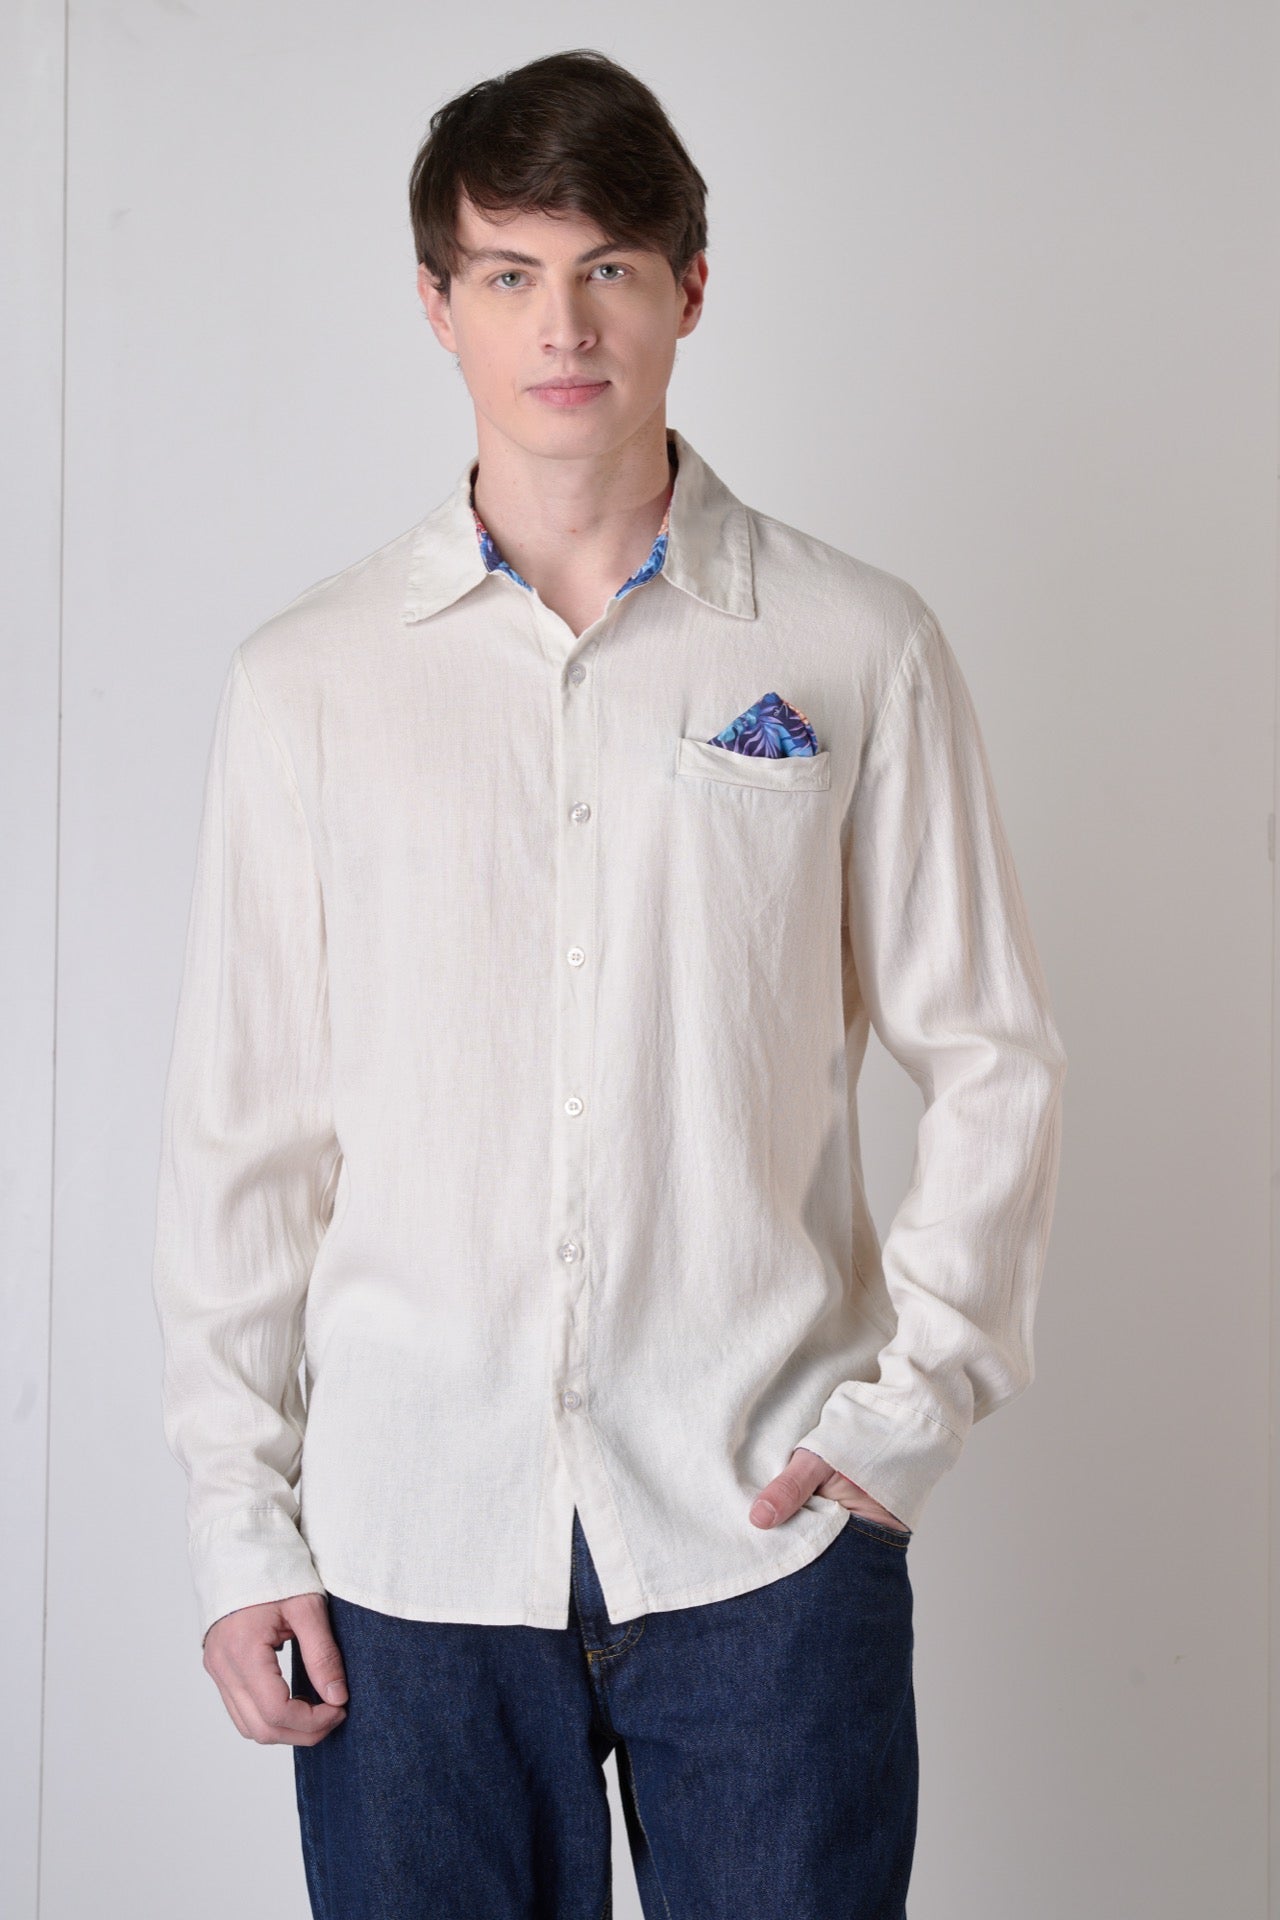 Tailored shirt in sand linen with pocket square, interior and cuffs in V2 fabric